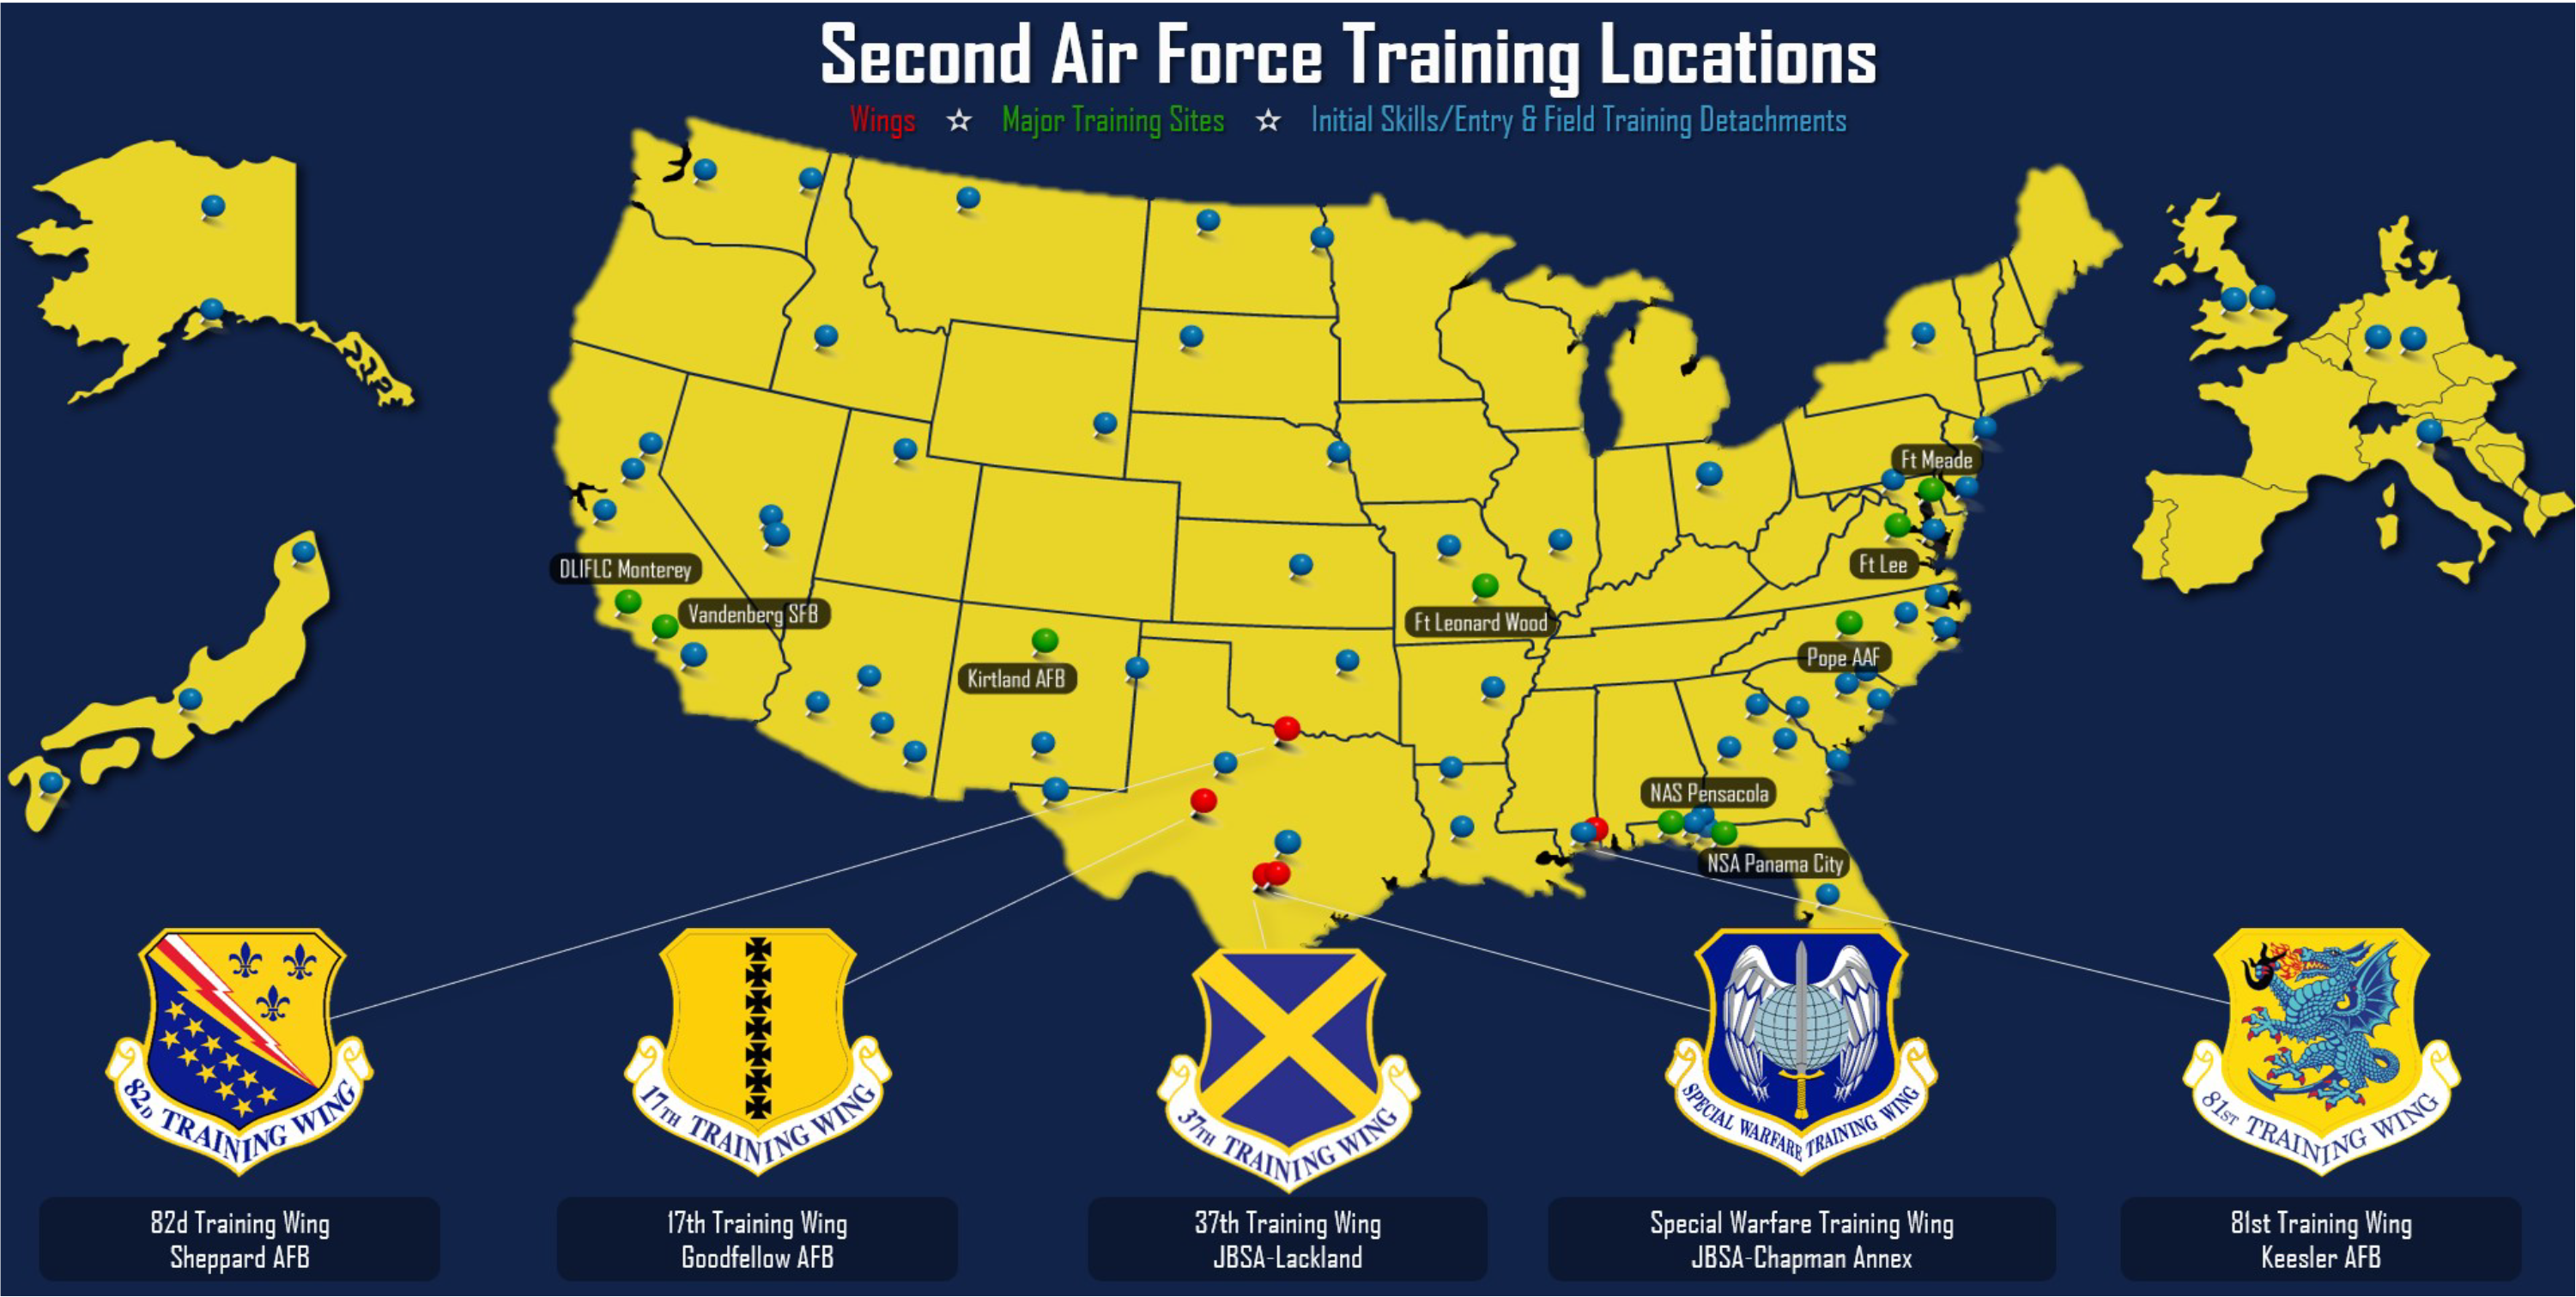 Image of locations of the units under Second Air Force